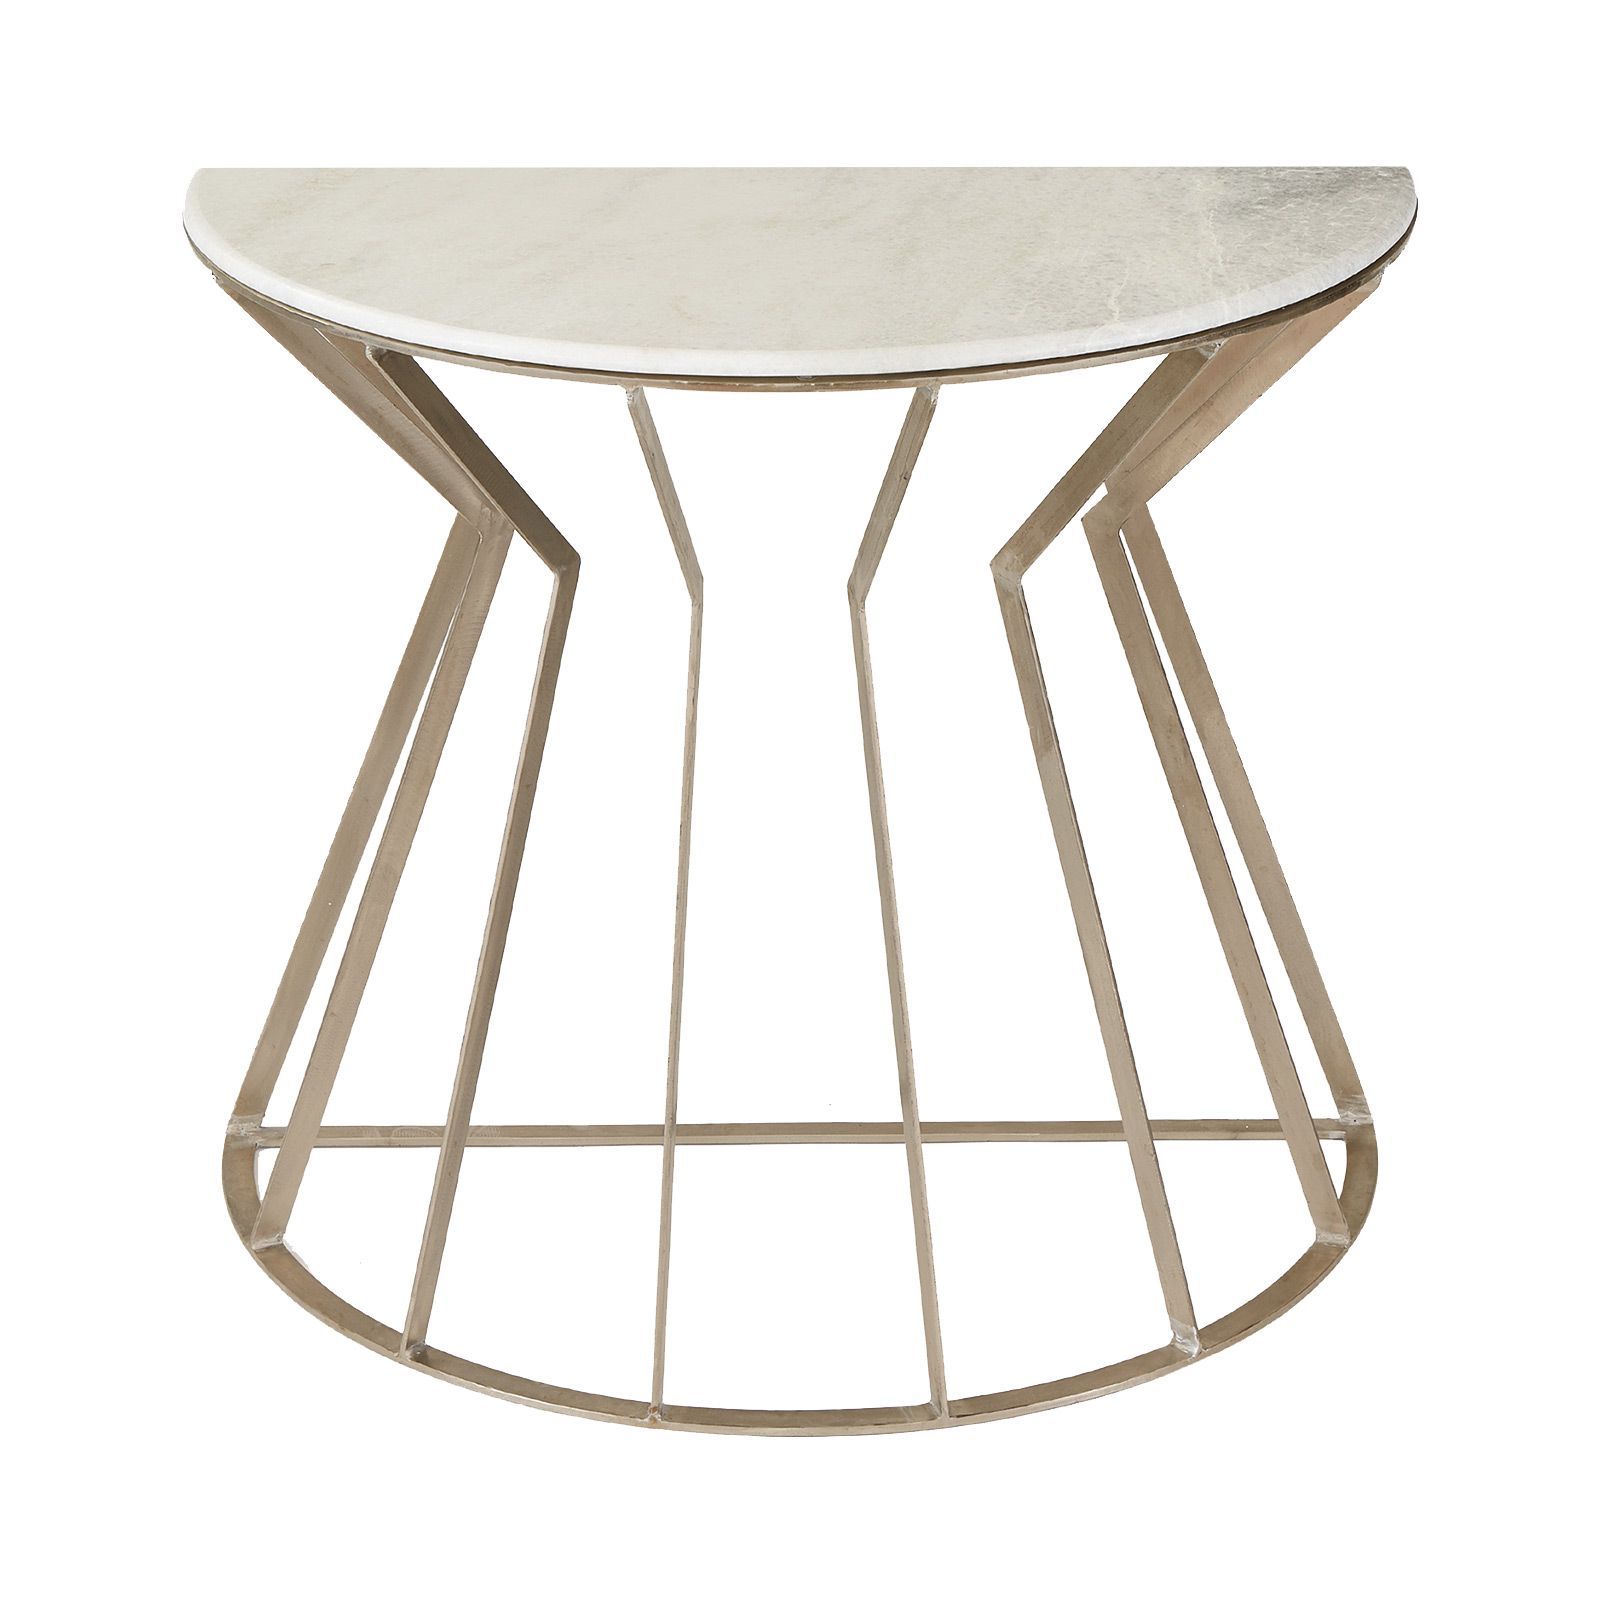 Bring The Best Of Scintillating Marble And Chic Metal Into One Inside Elke Marble Console Tables With Brass Base (View 28 of 30)